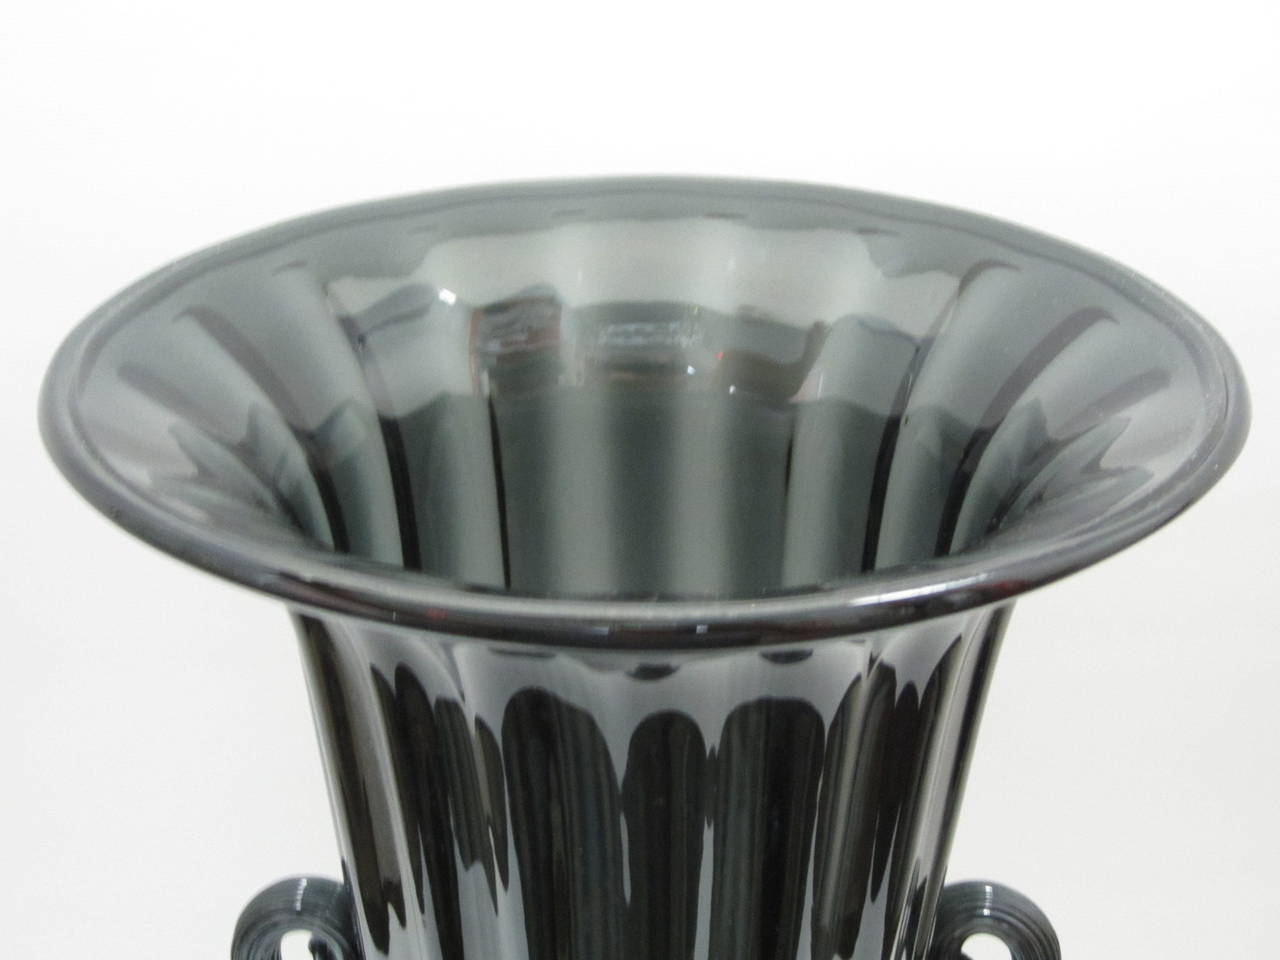 Fantastic tall trumpet-shaped urn vase in ribbed charcoal colored slightly iridescent glass. The applied glass handles are thicker with a tighter ribbed design. Inscribed signature reads 